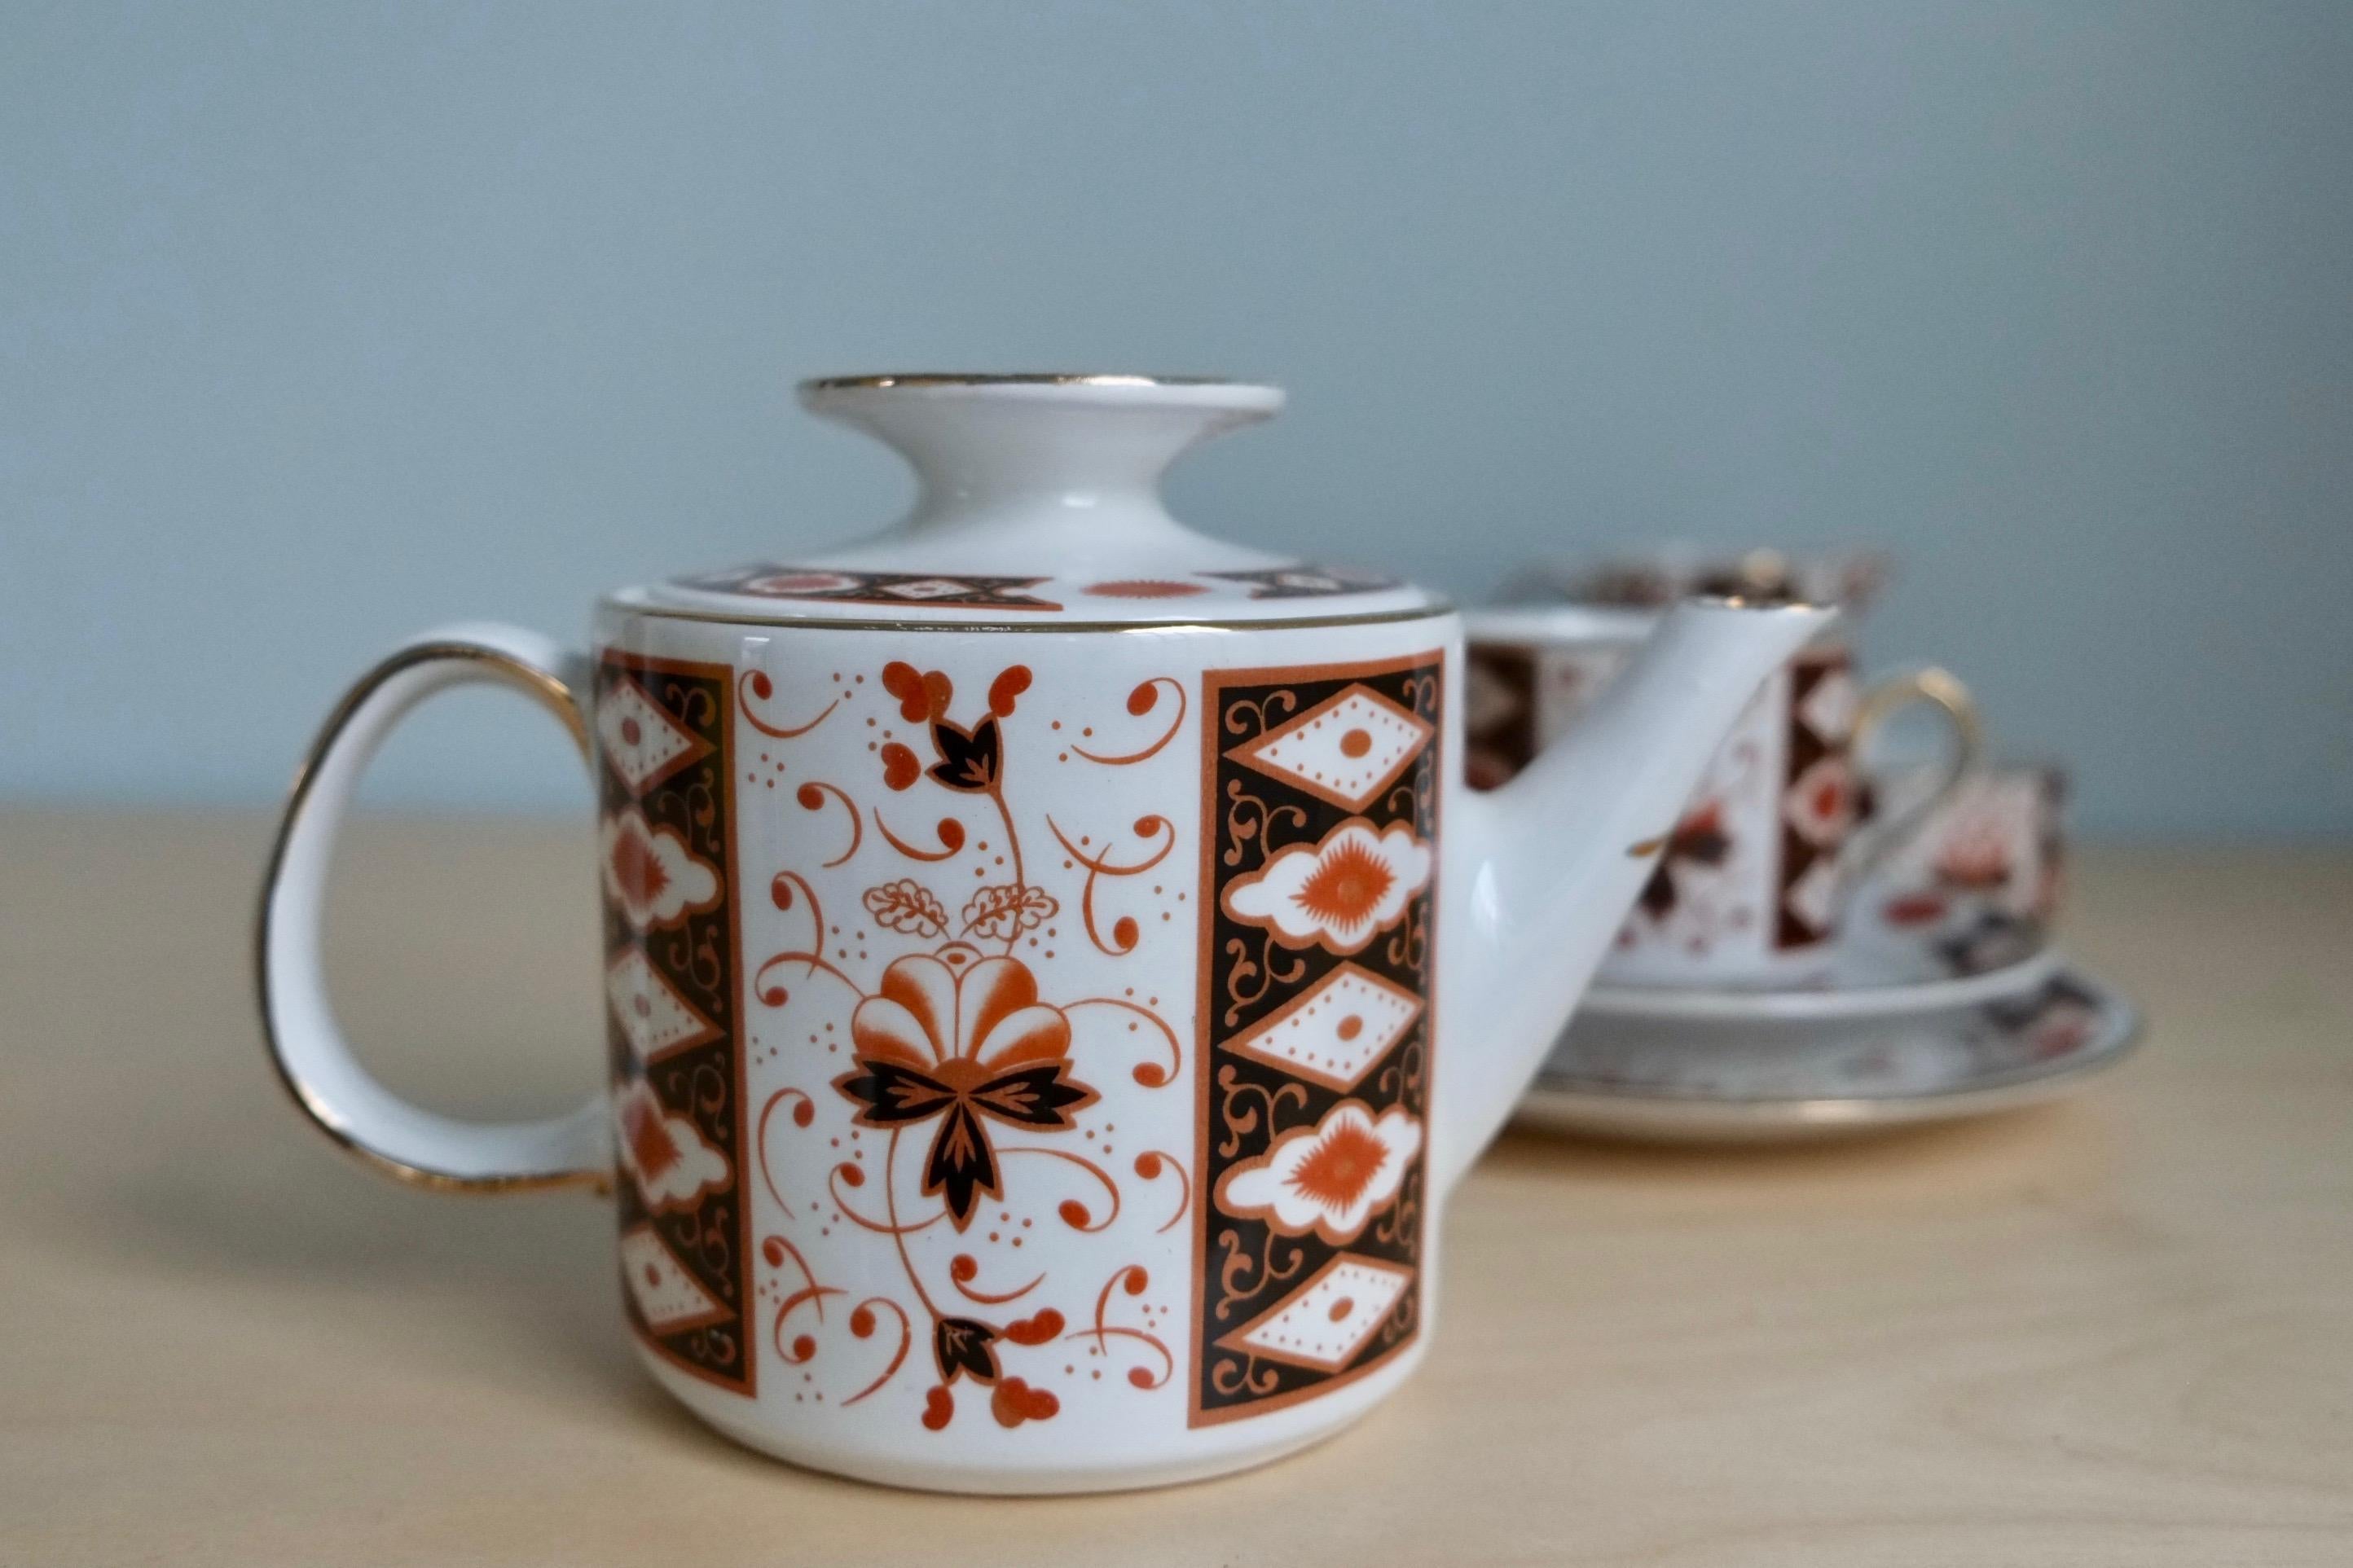 A beautiful midcentury Irish tea set by Arklow pottery.
Made in the republic of Ireland. 

This tea set has a beautiful graphic quality to the design with geometric shapes in rust and black. Finished with stunning hand painted 22 carat gold